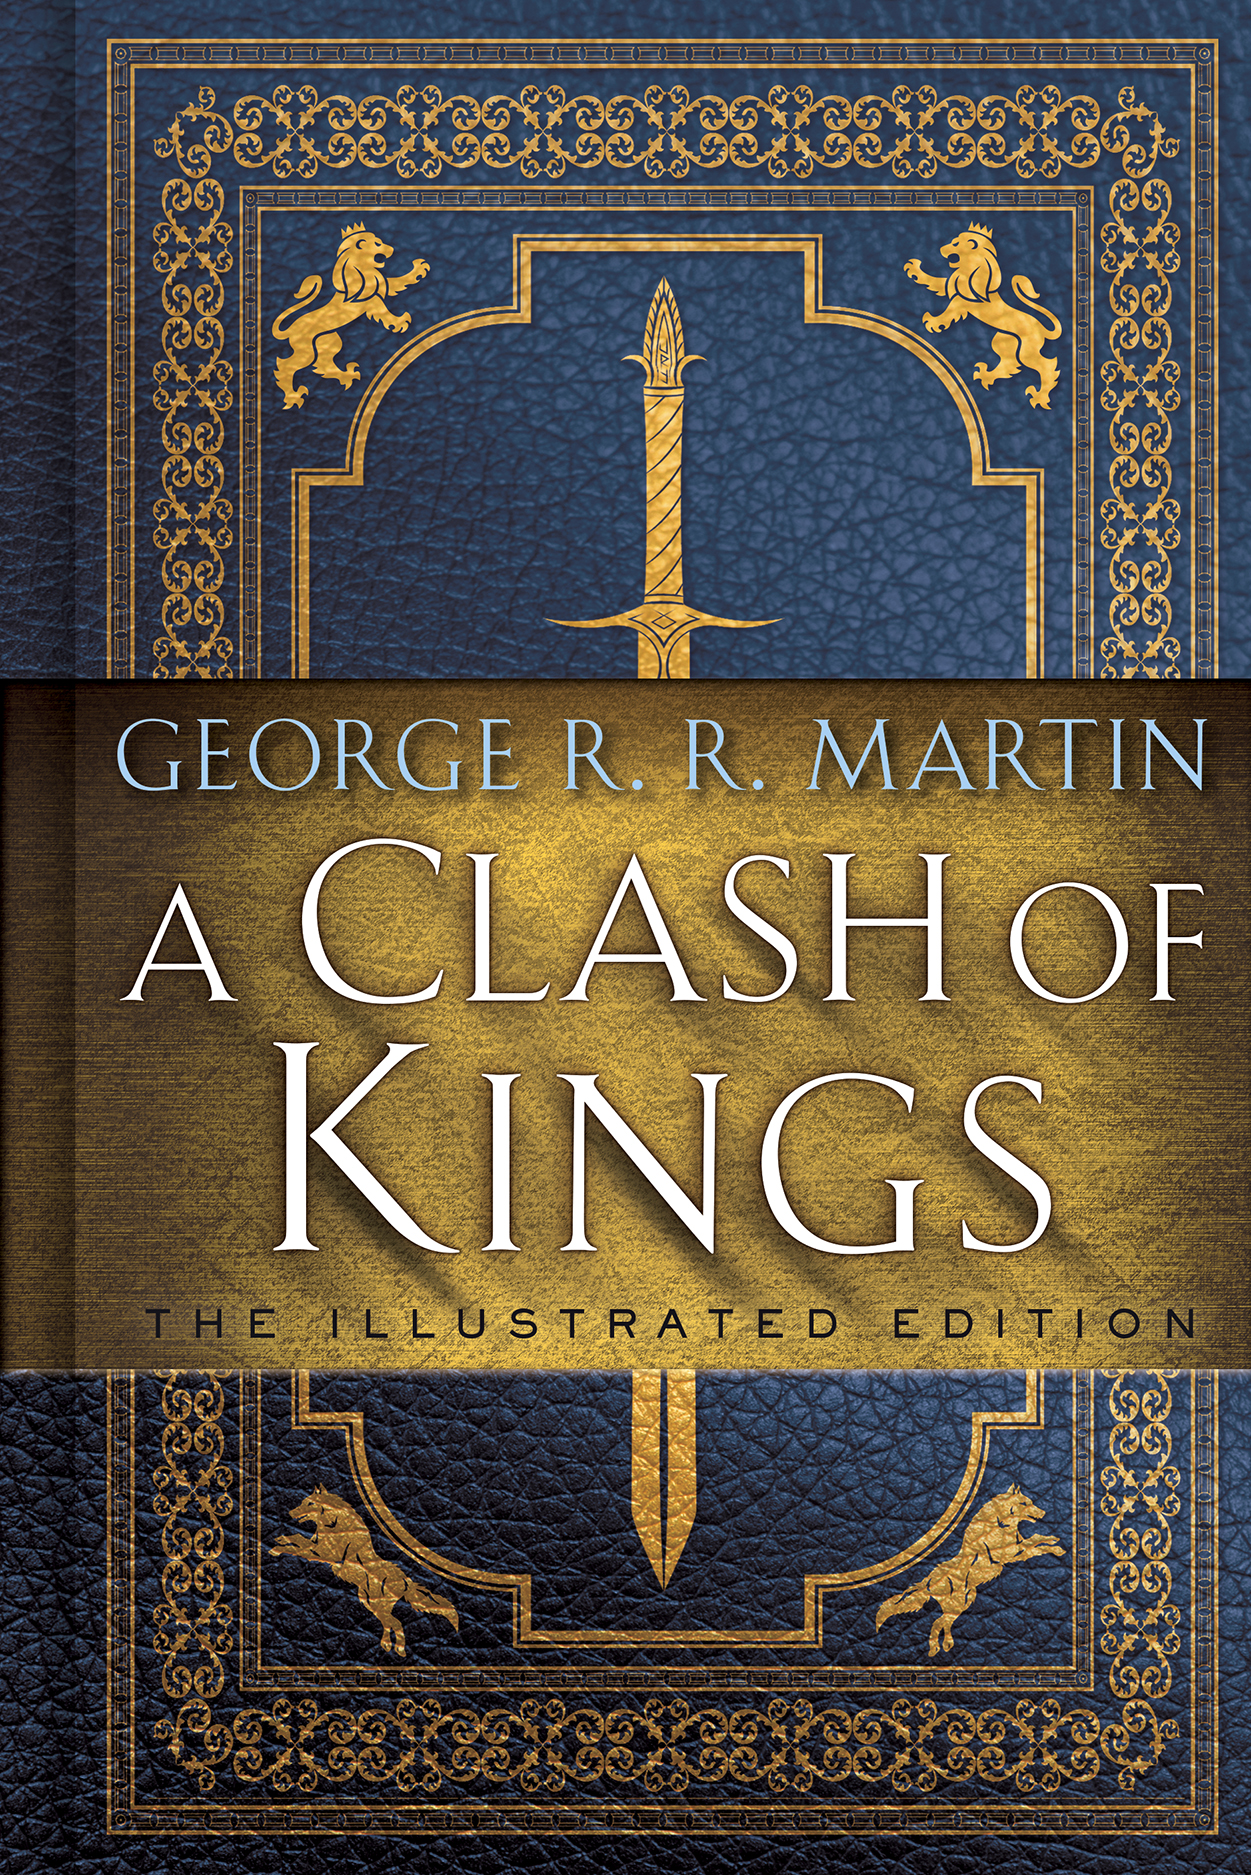 Clash of Kings Illustrated Edition